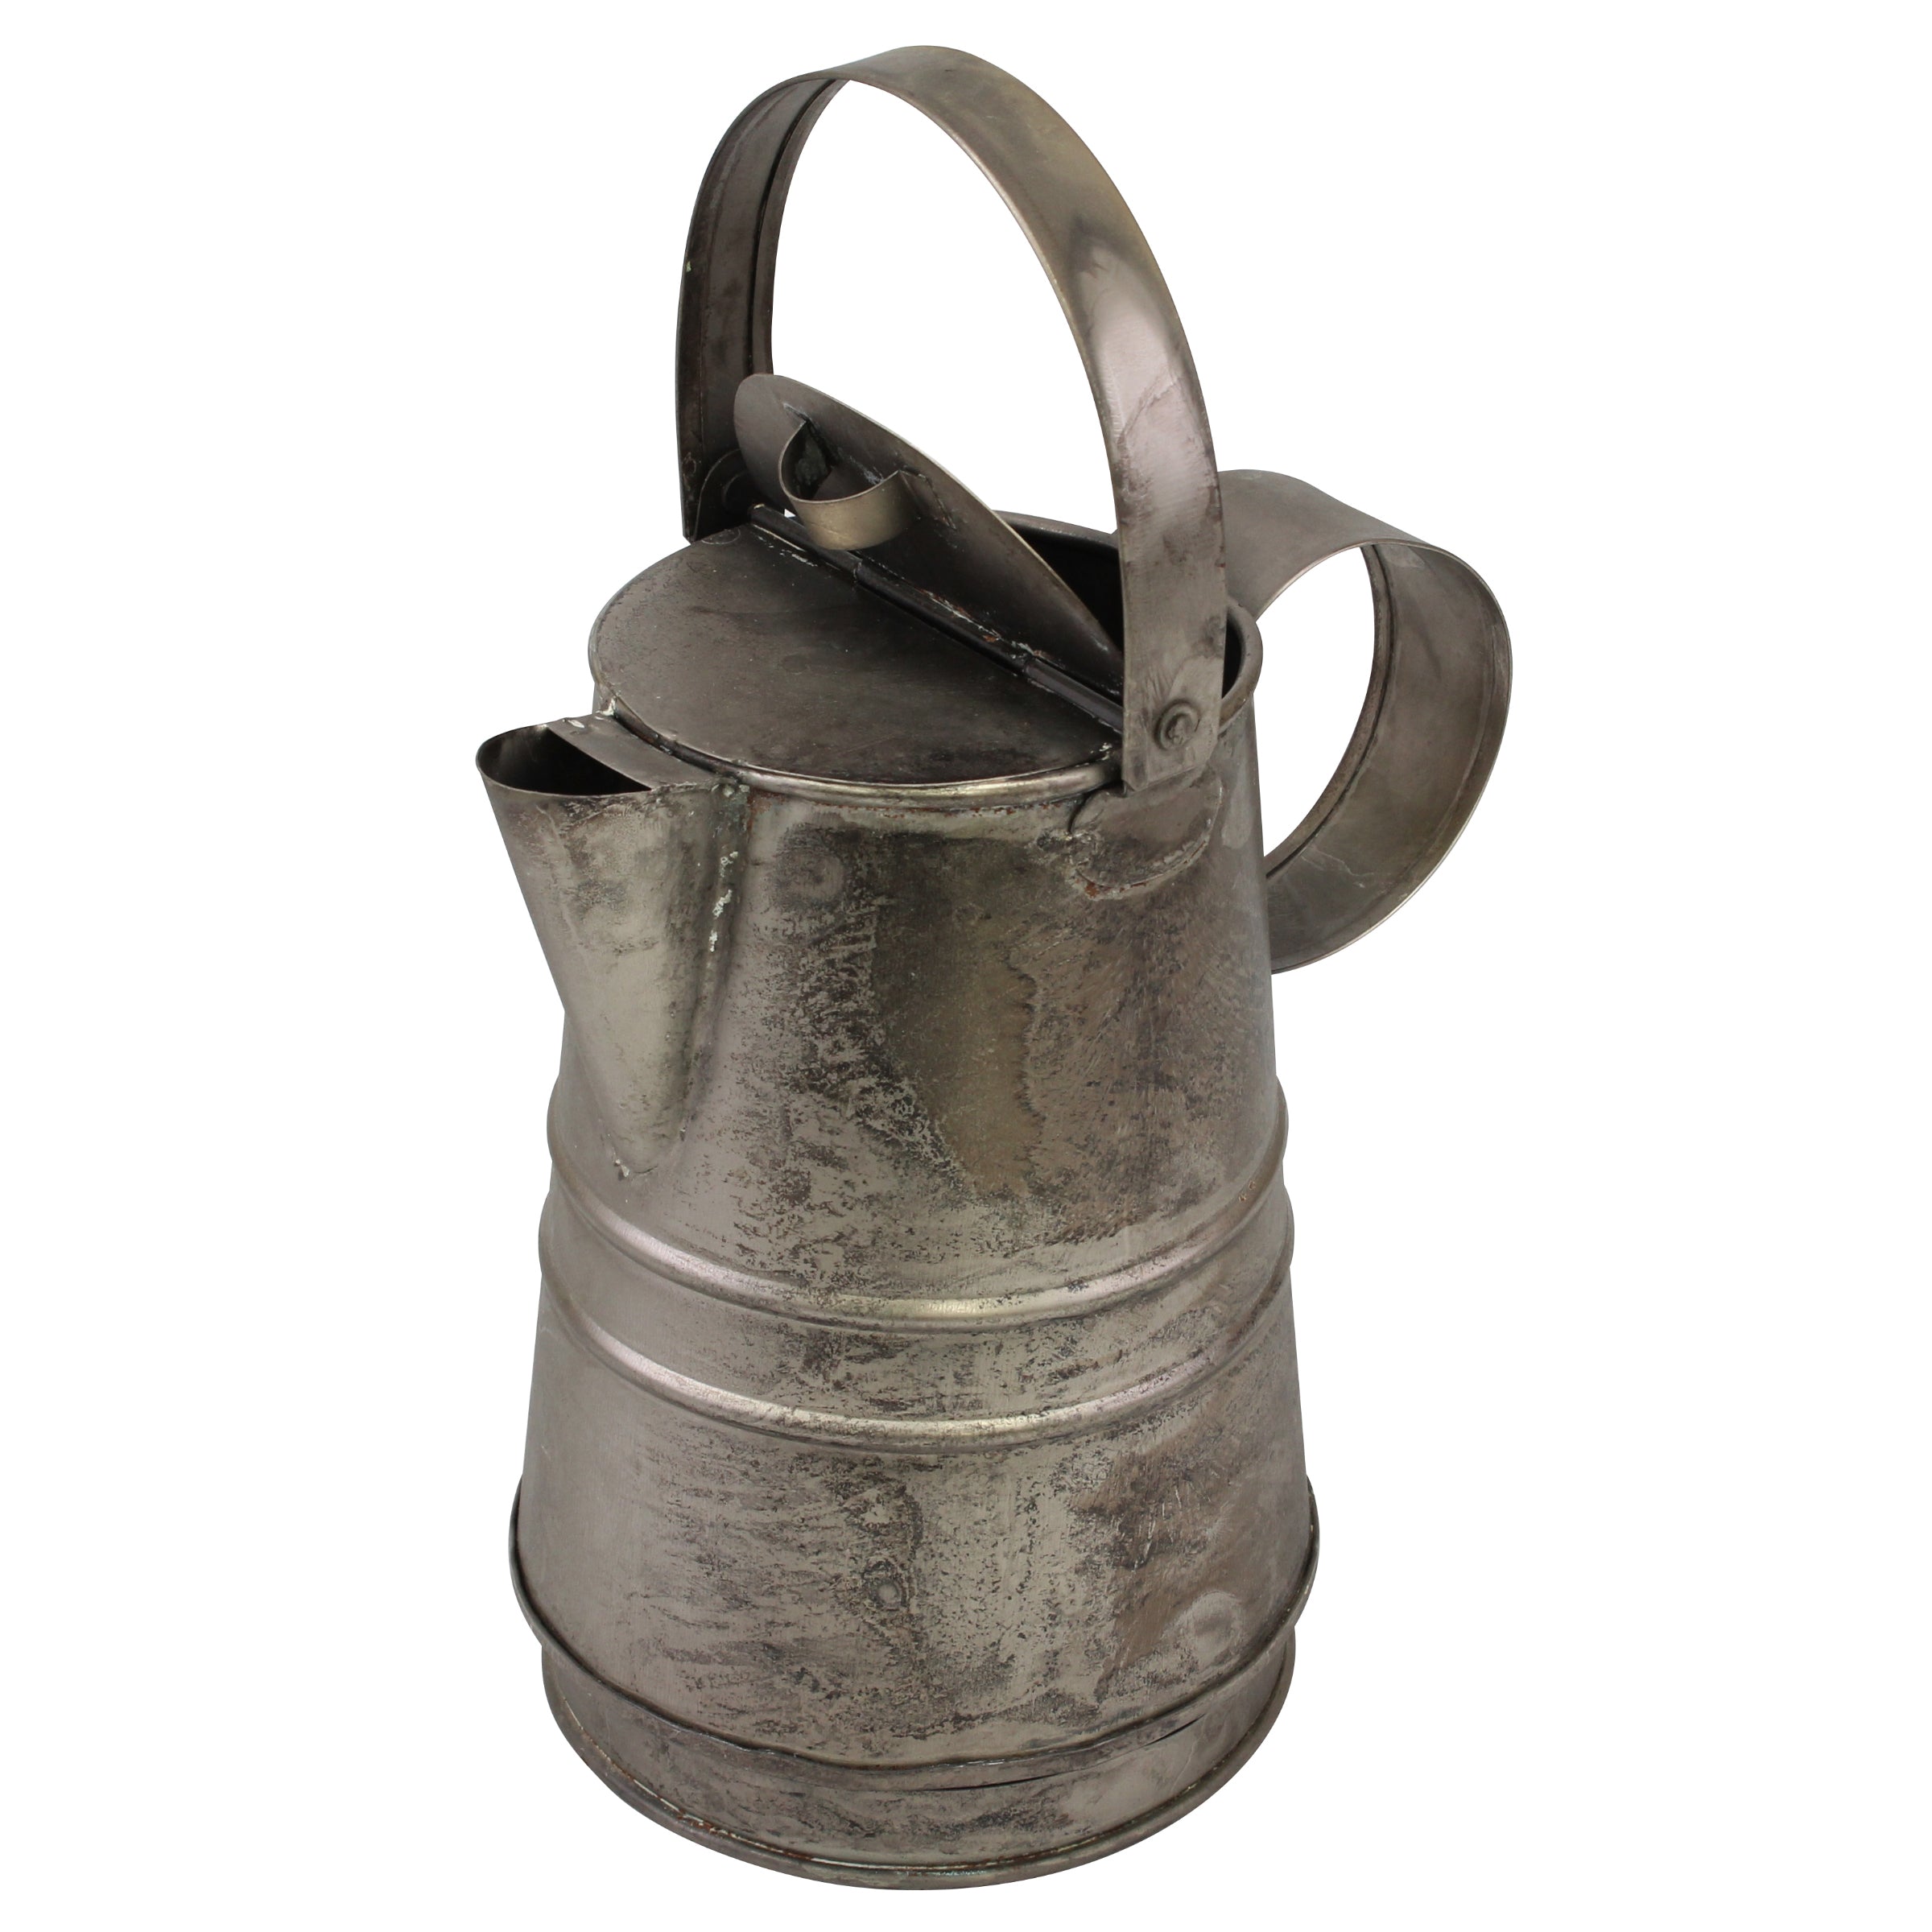 Antique Metal Pitcher with Lid, Metal Pitcher Decor